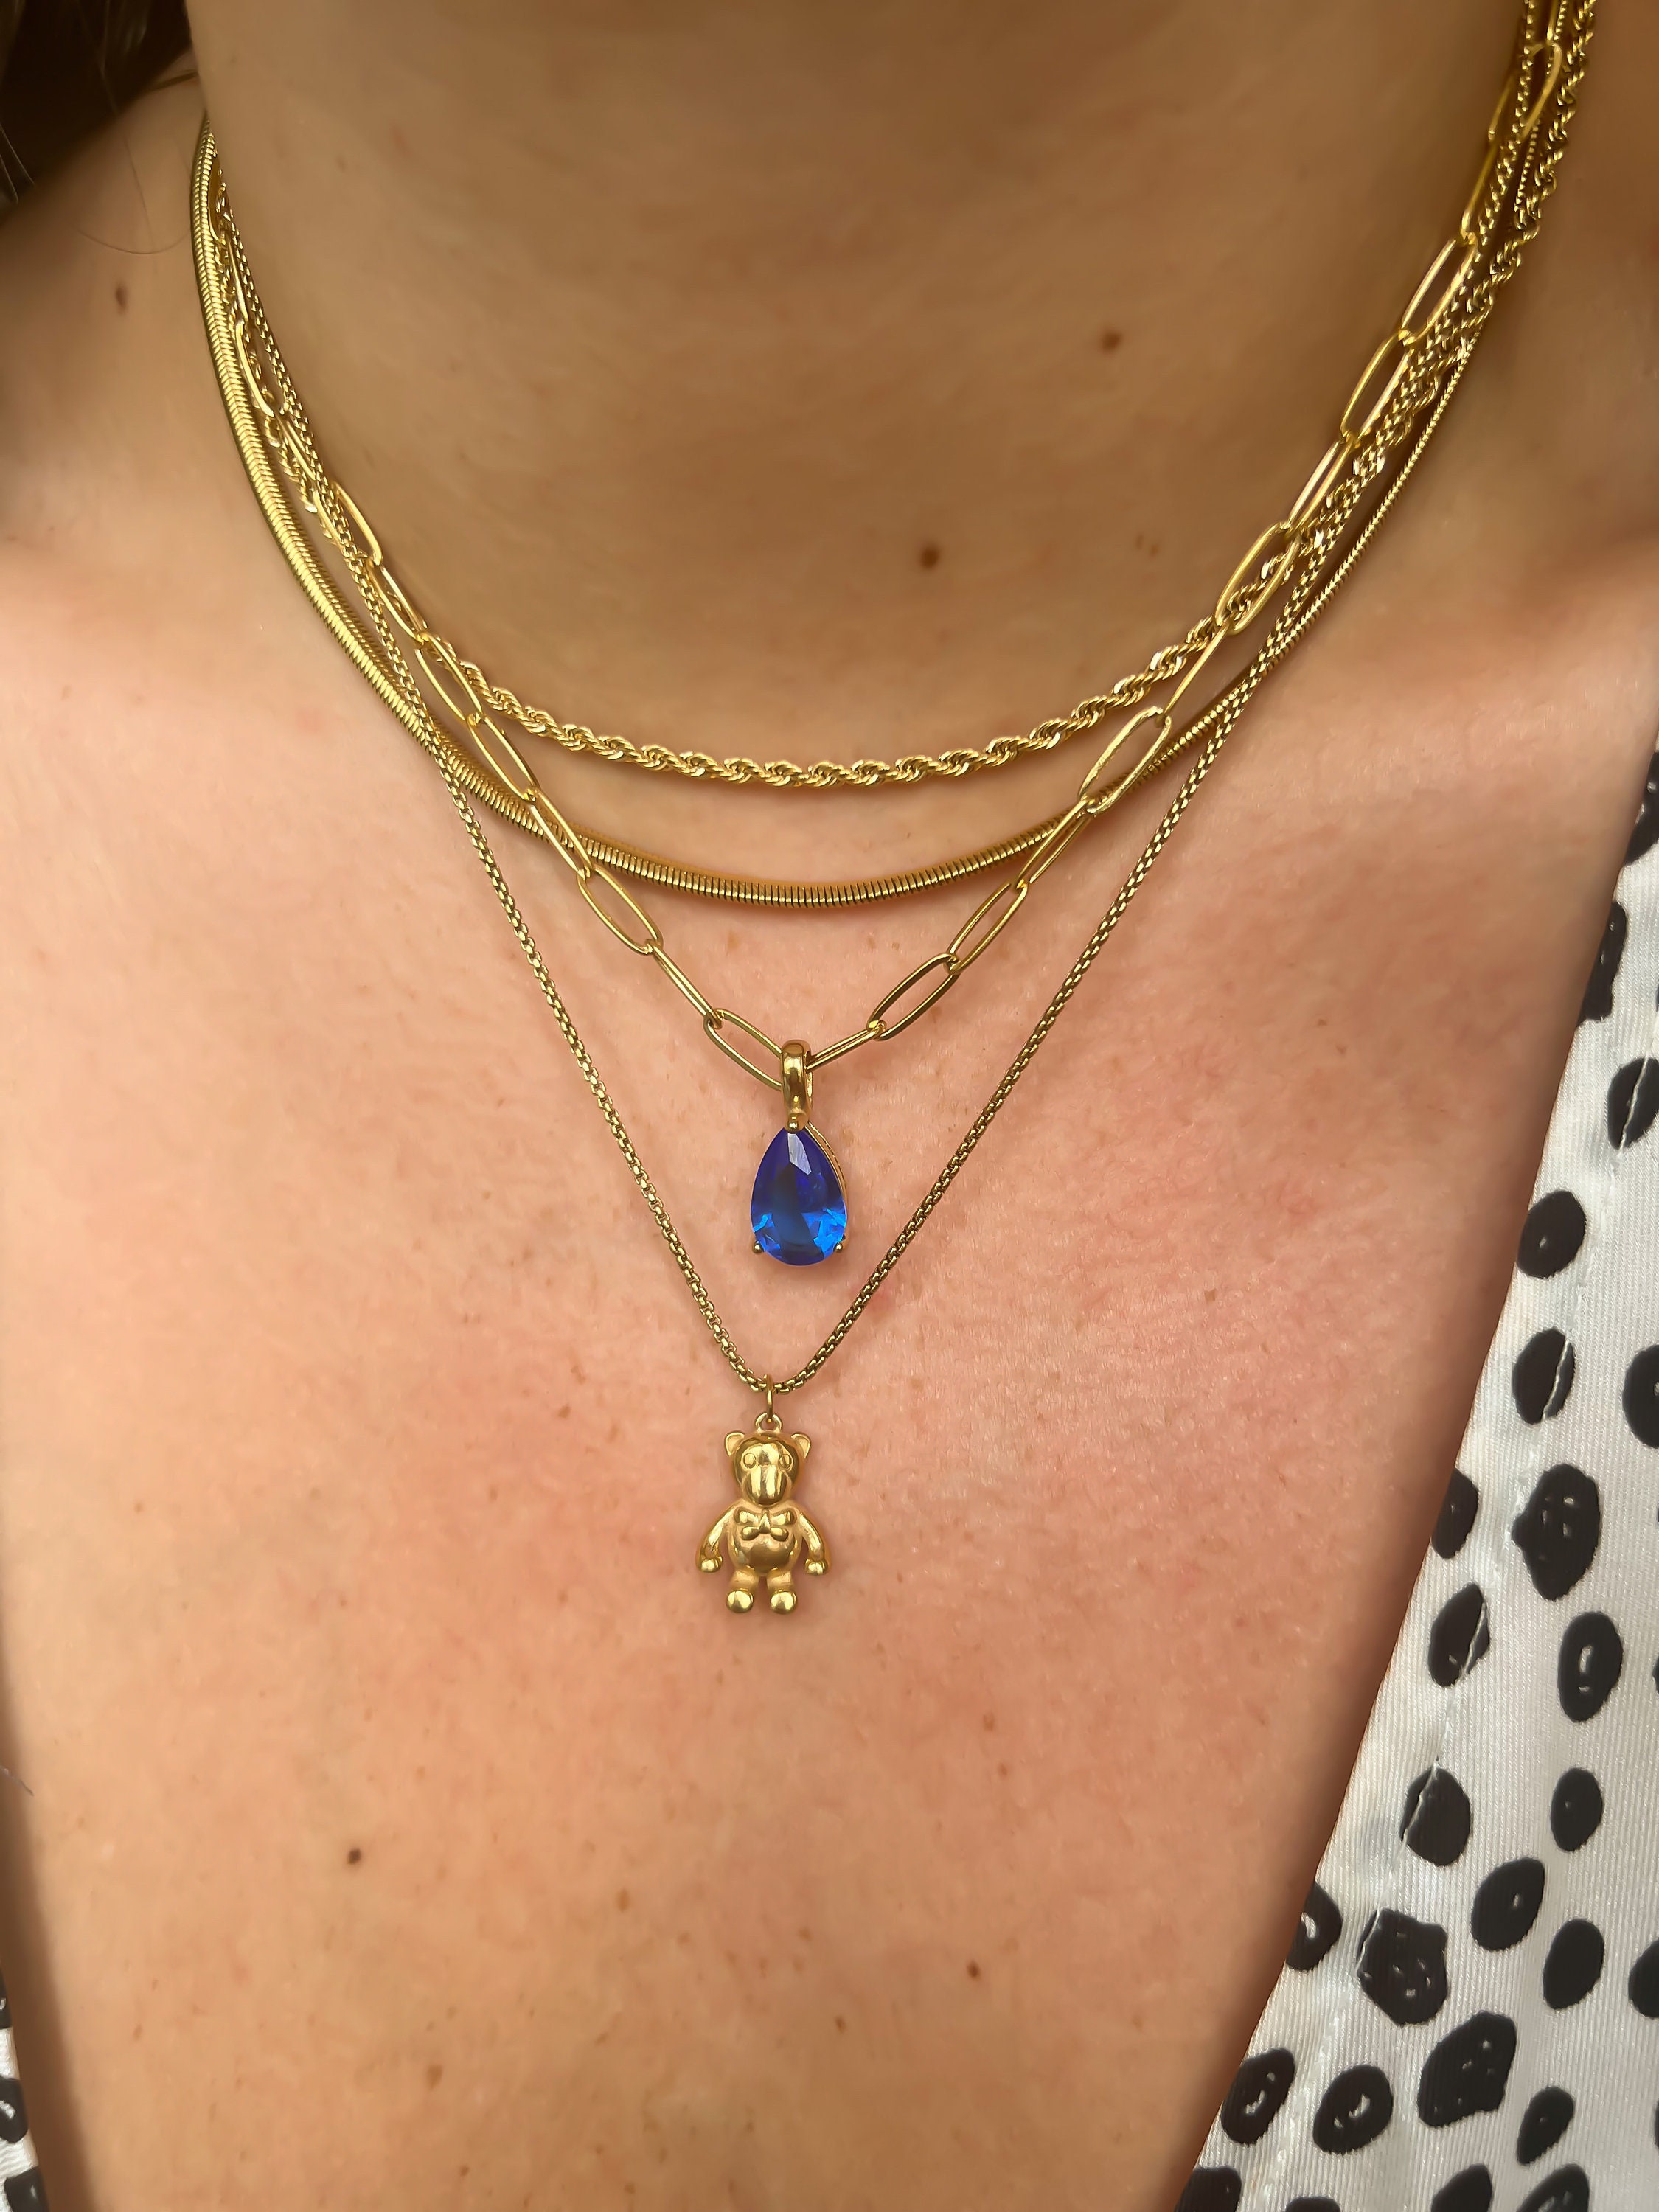 Pear Drop Pendant Necklace. 18K Pvd Gold Plated Stainless Steel Blue Pendant. Rope Chain. Emerald Pendant. Stone